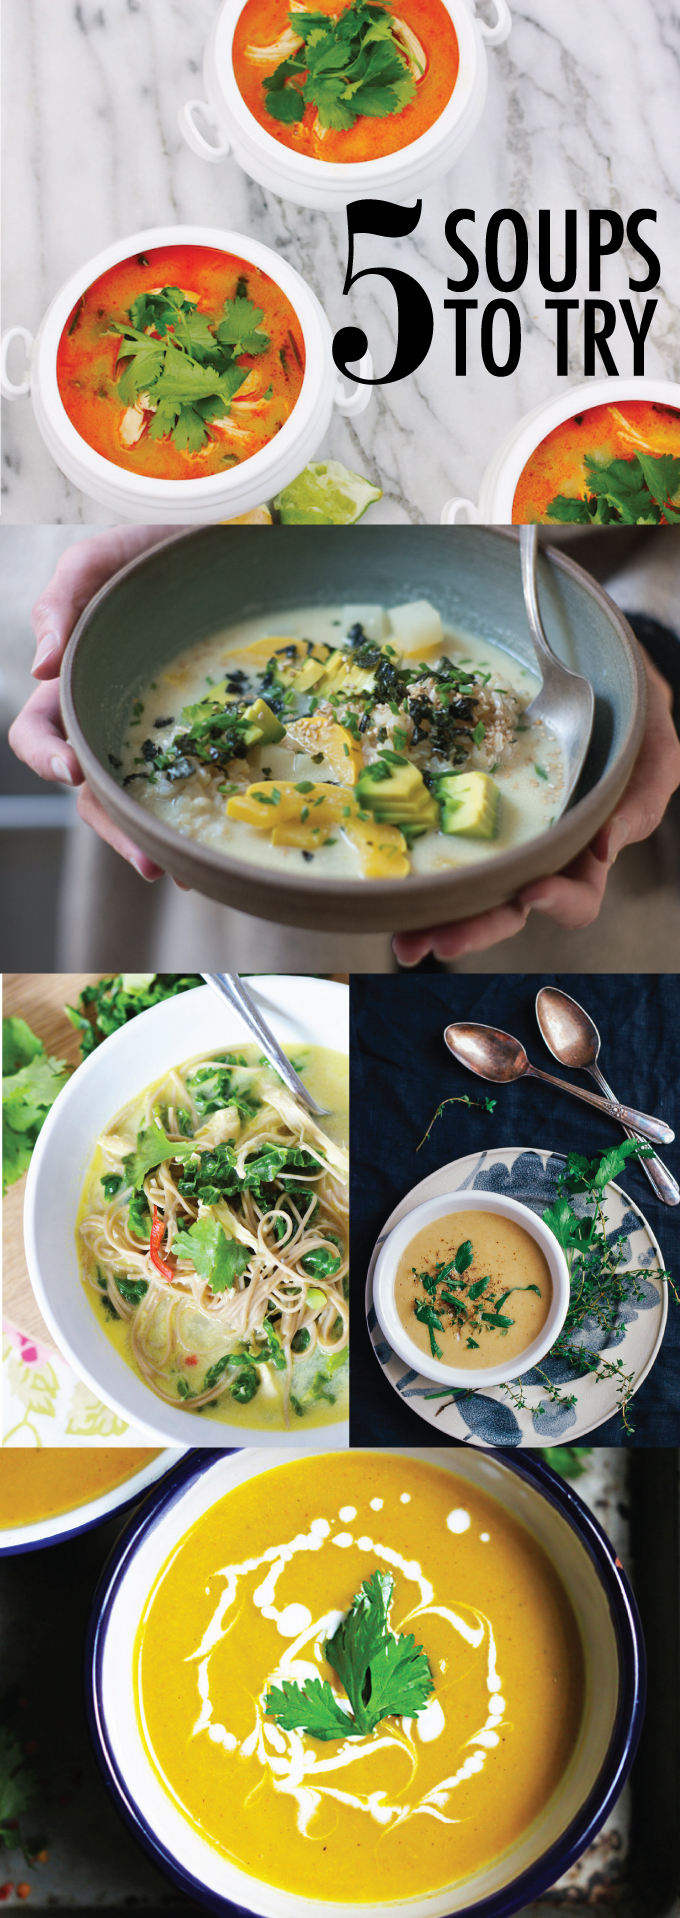 Soups-to-try